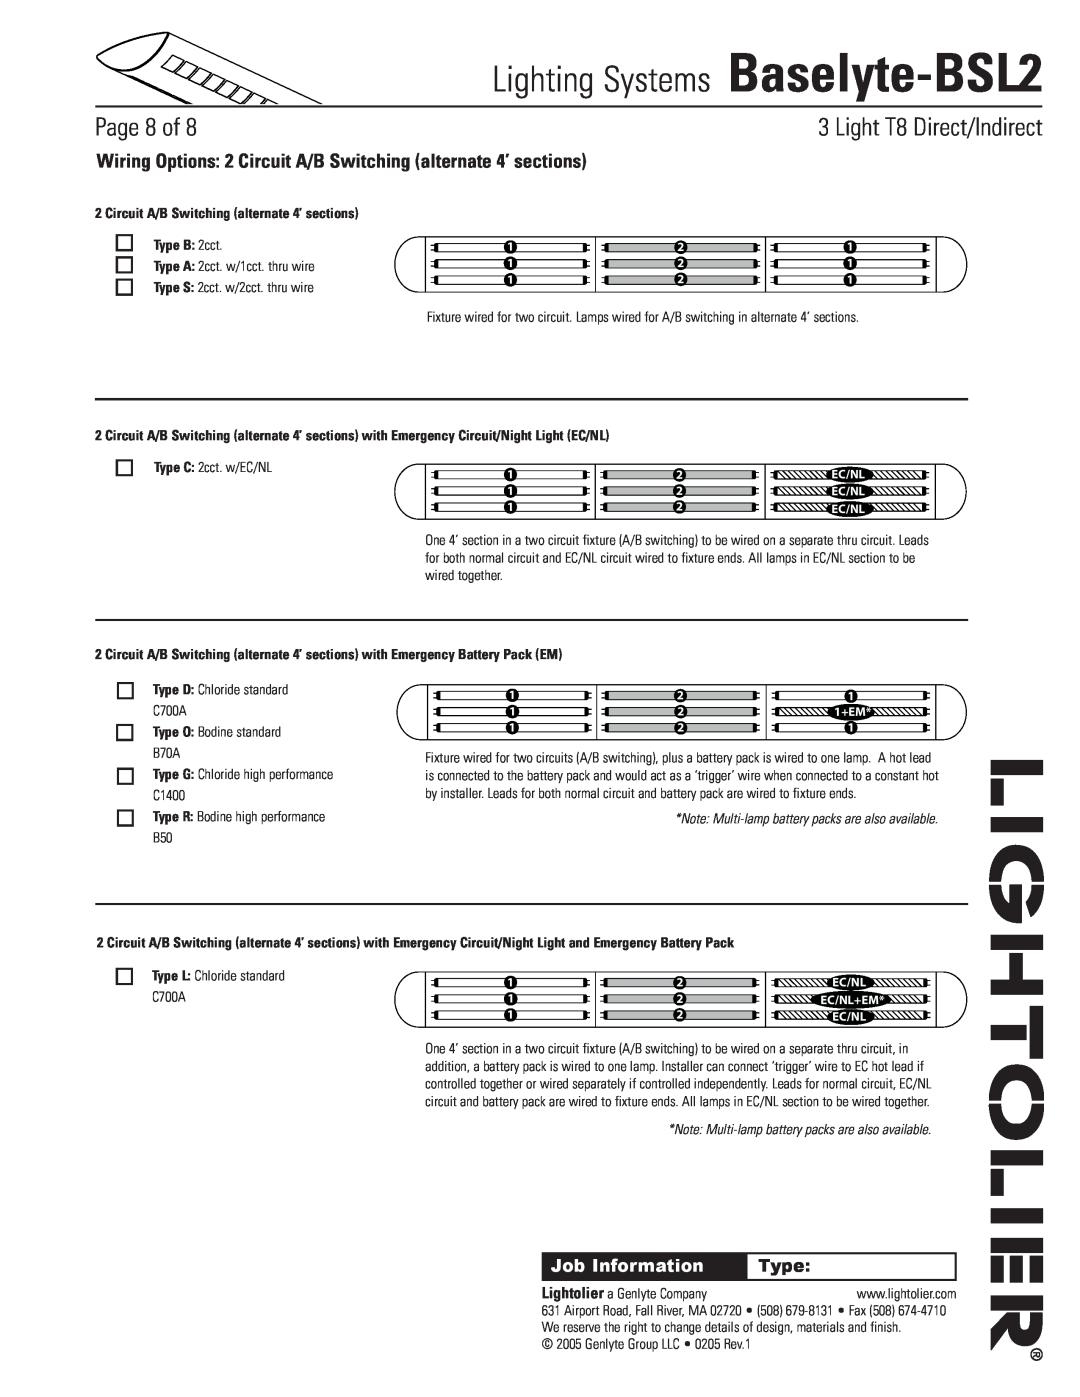 Lightolier Baselyte-BSL2 Circuit A/B Switching alternate 4’ sections, Type B 2cct, Type O Bodine standard B70A, Page of 